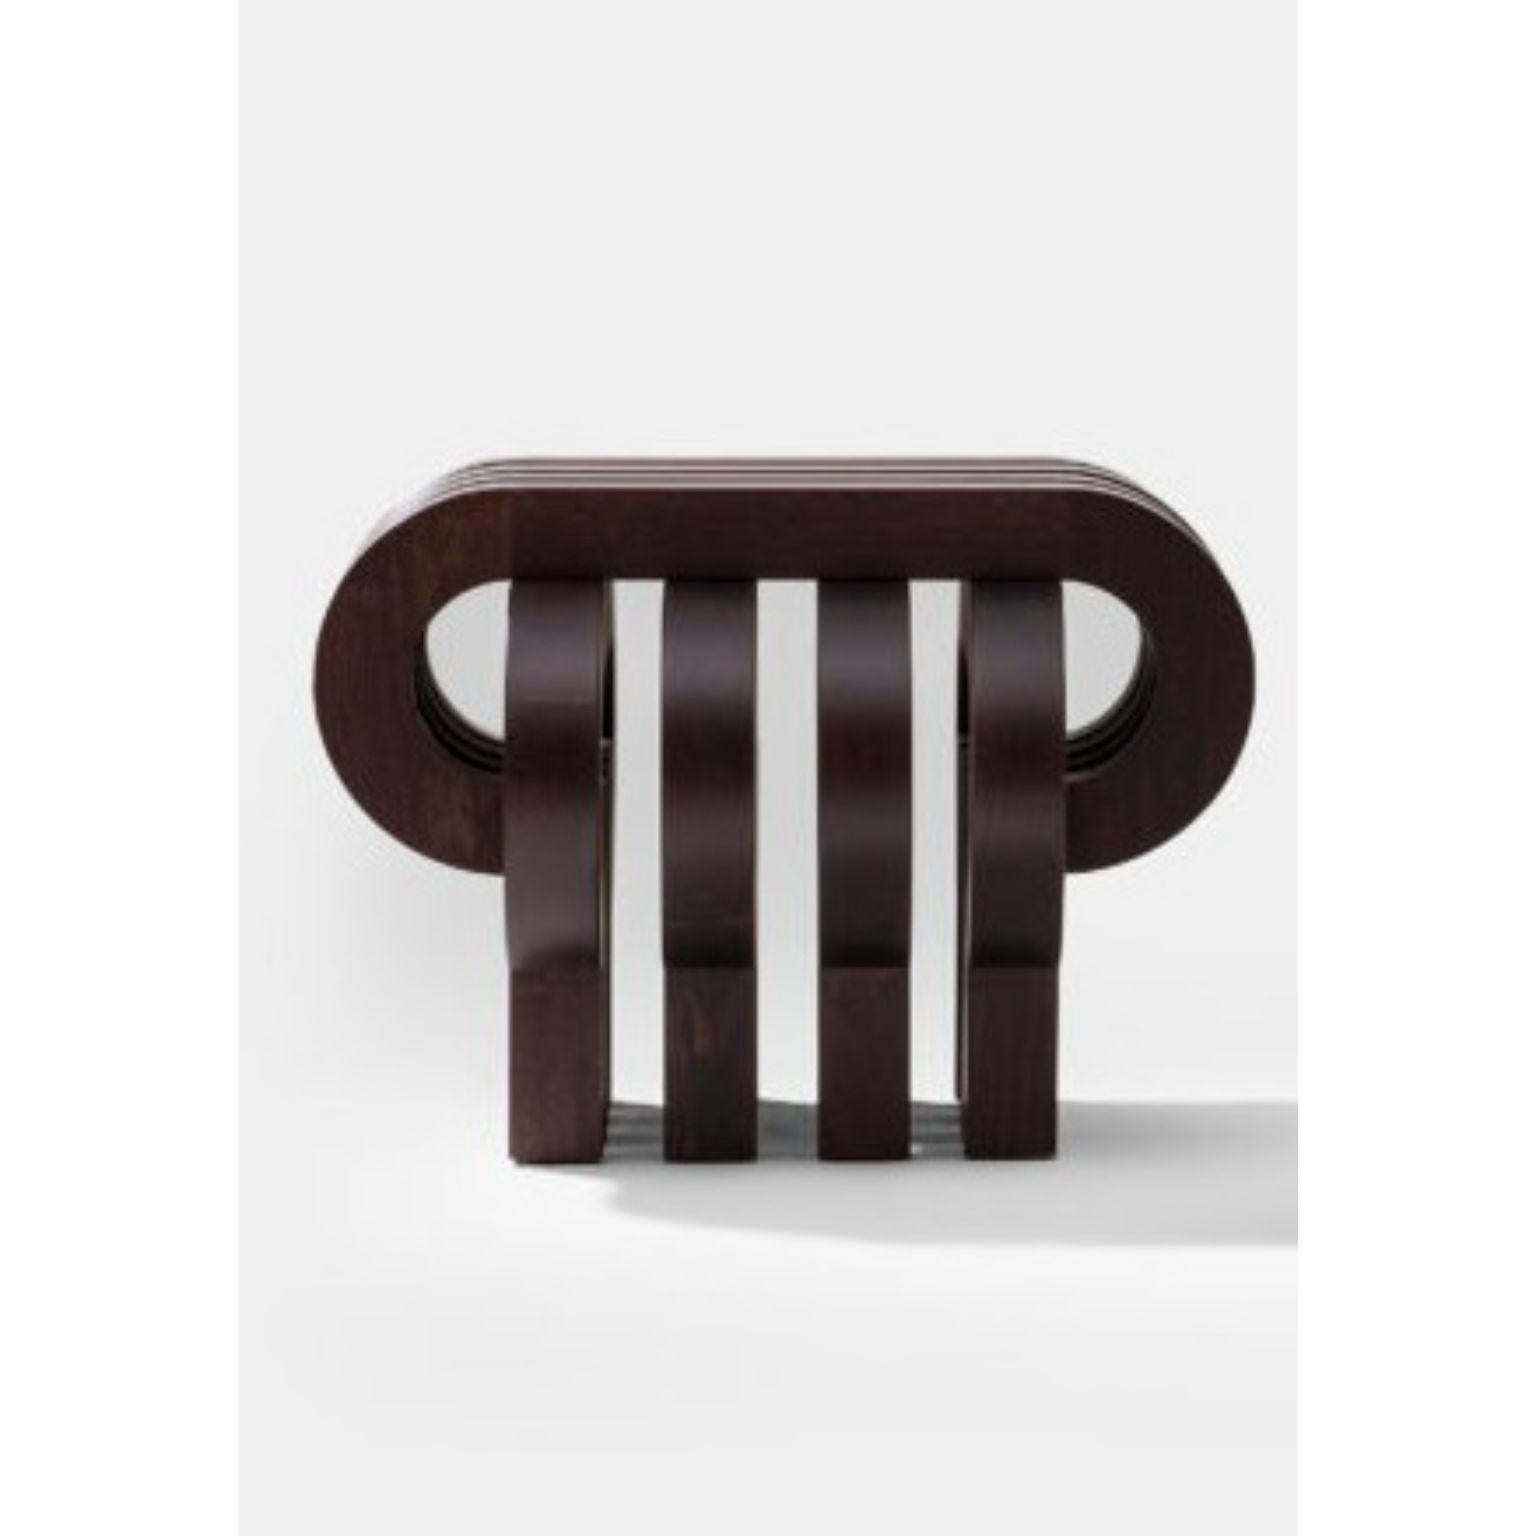 Tamga Wenge Stool by Tolga Sencer
Dimensions: D 55.5 x W 55.5 x H 40 cm.
Materials: Wenge wood.

Available in different wood options (massive american walnut, massive wenge, oak, afromosia or black lacquer with stainless steel details). Please